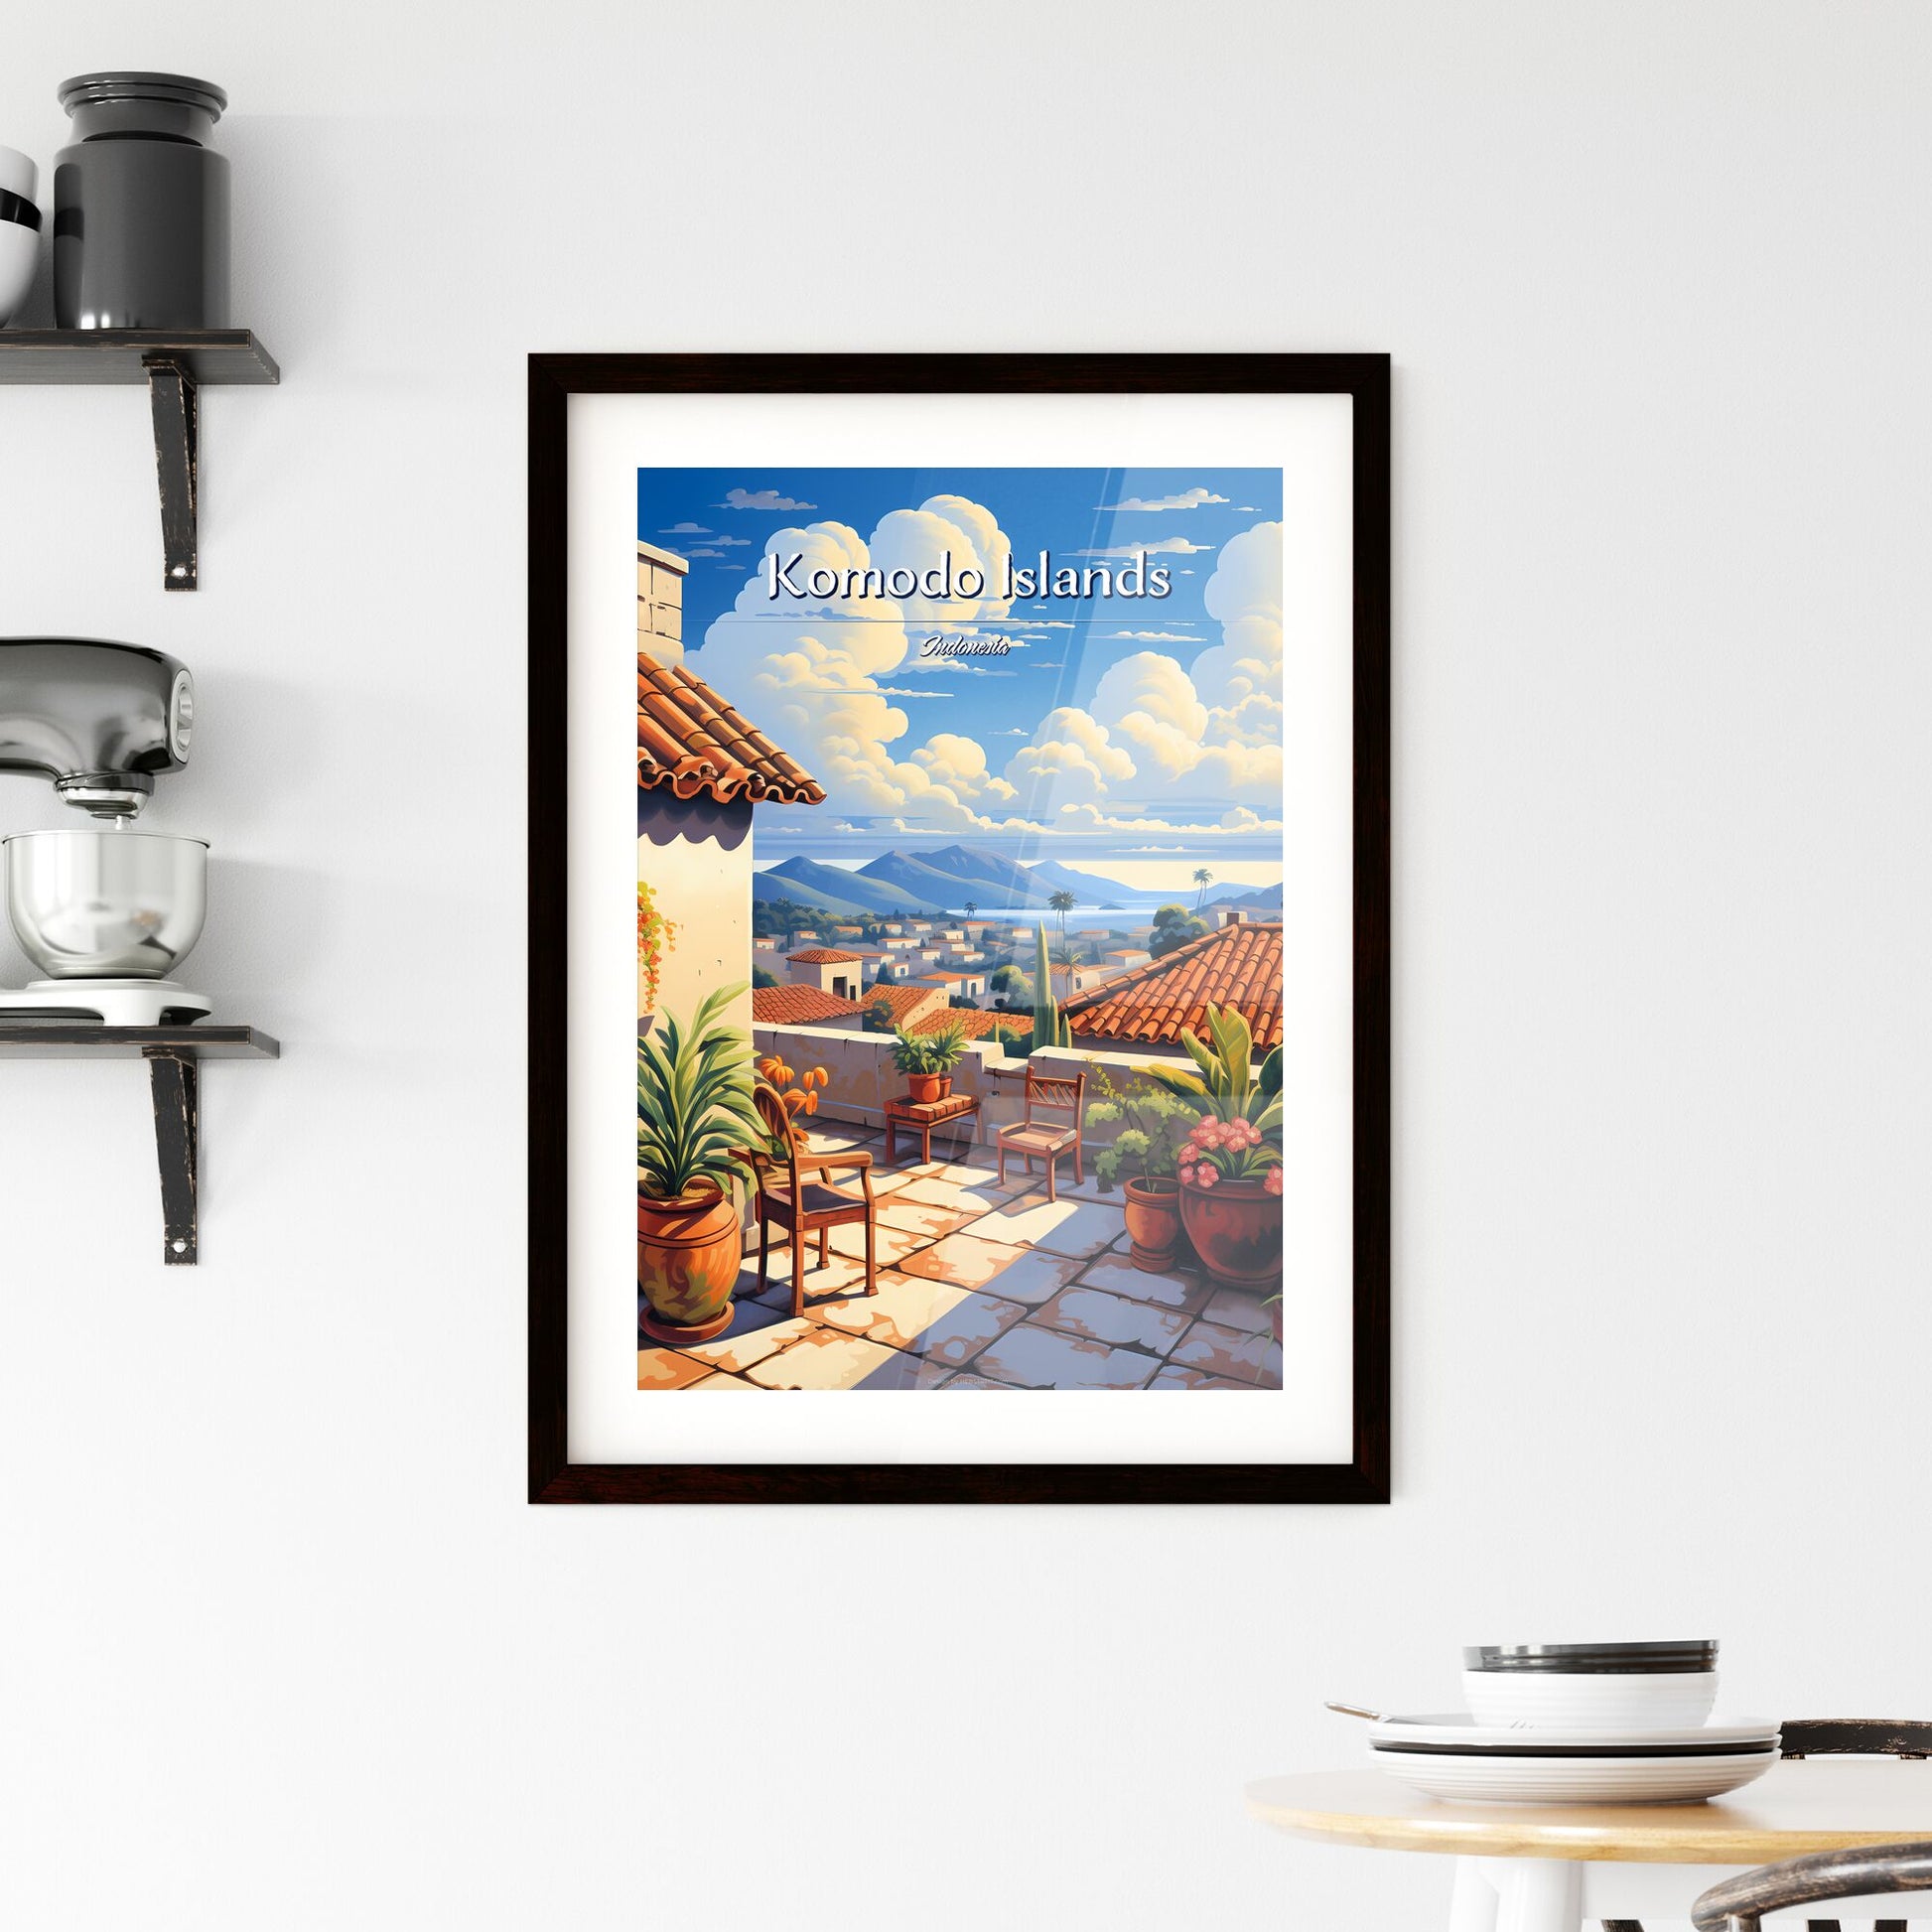 On the roofs of Komodo Islands, Indonesia - Art print of a patio with chairs and plants on the roof Default Title